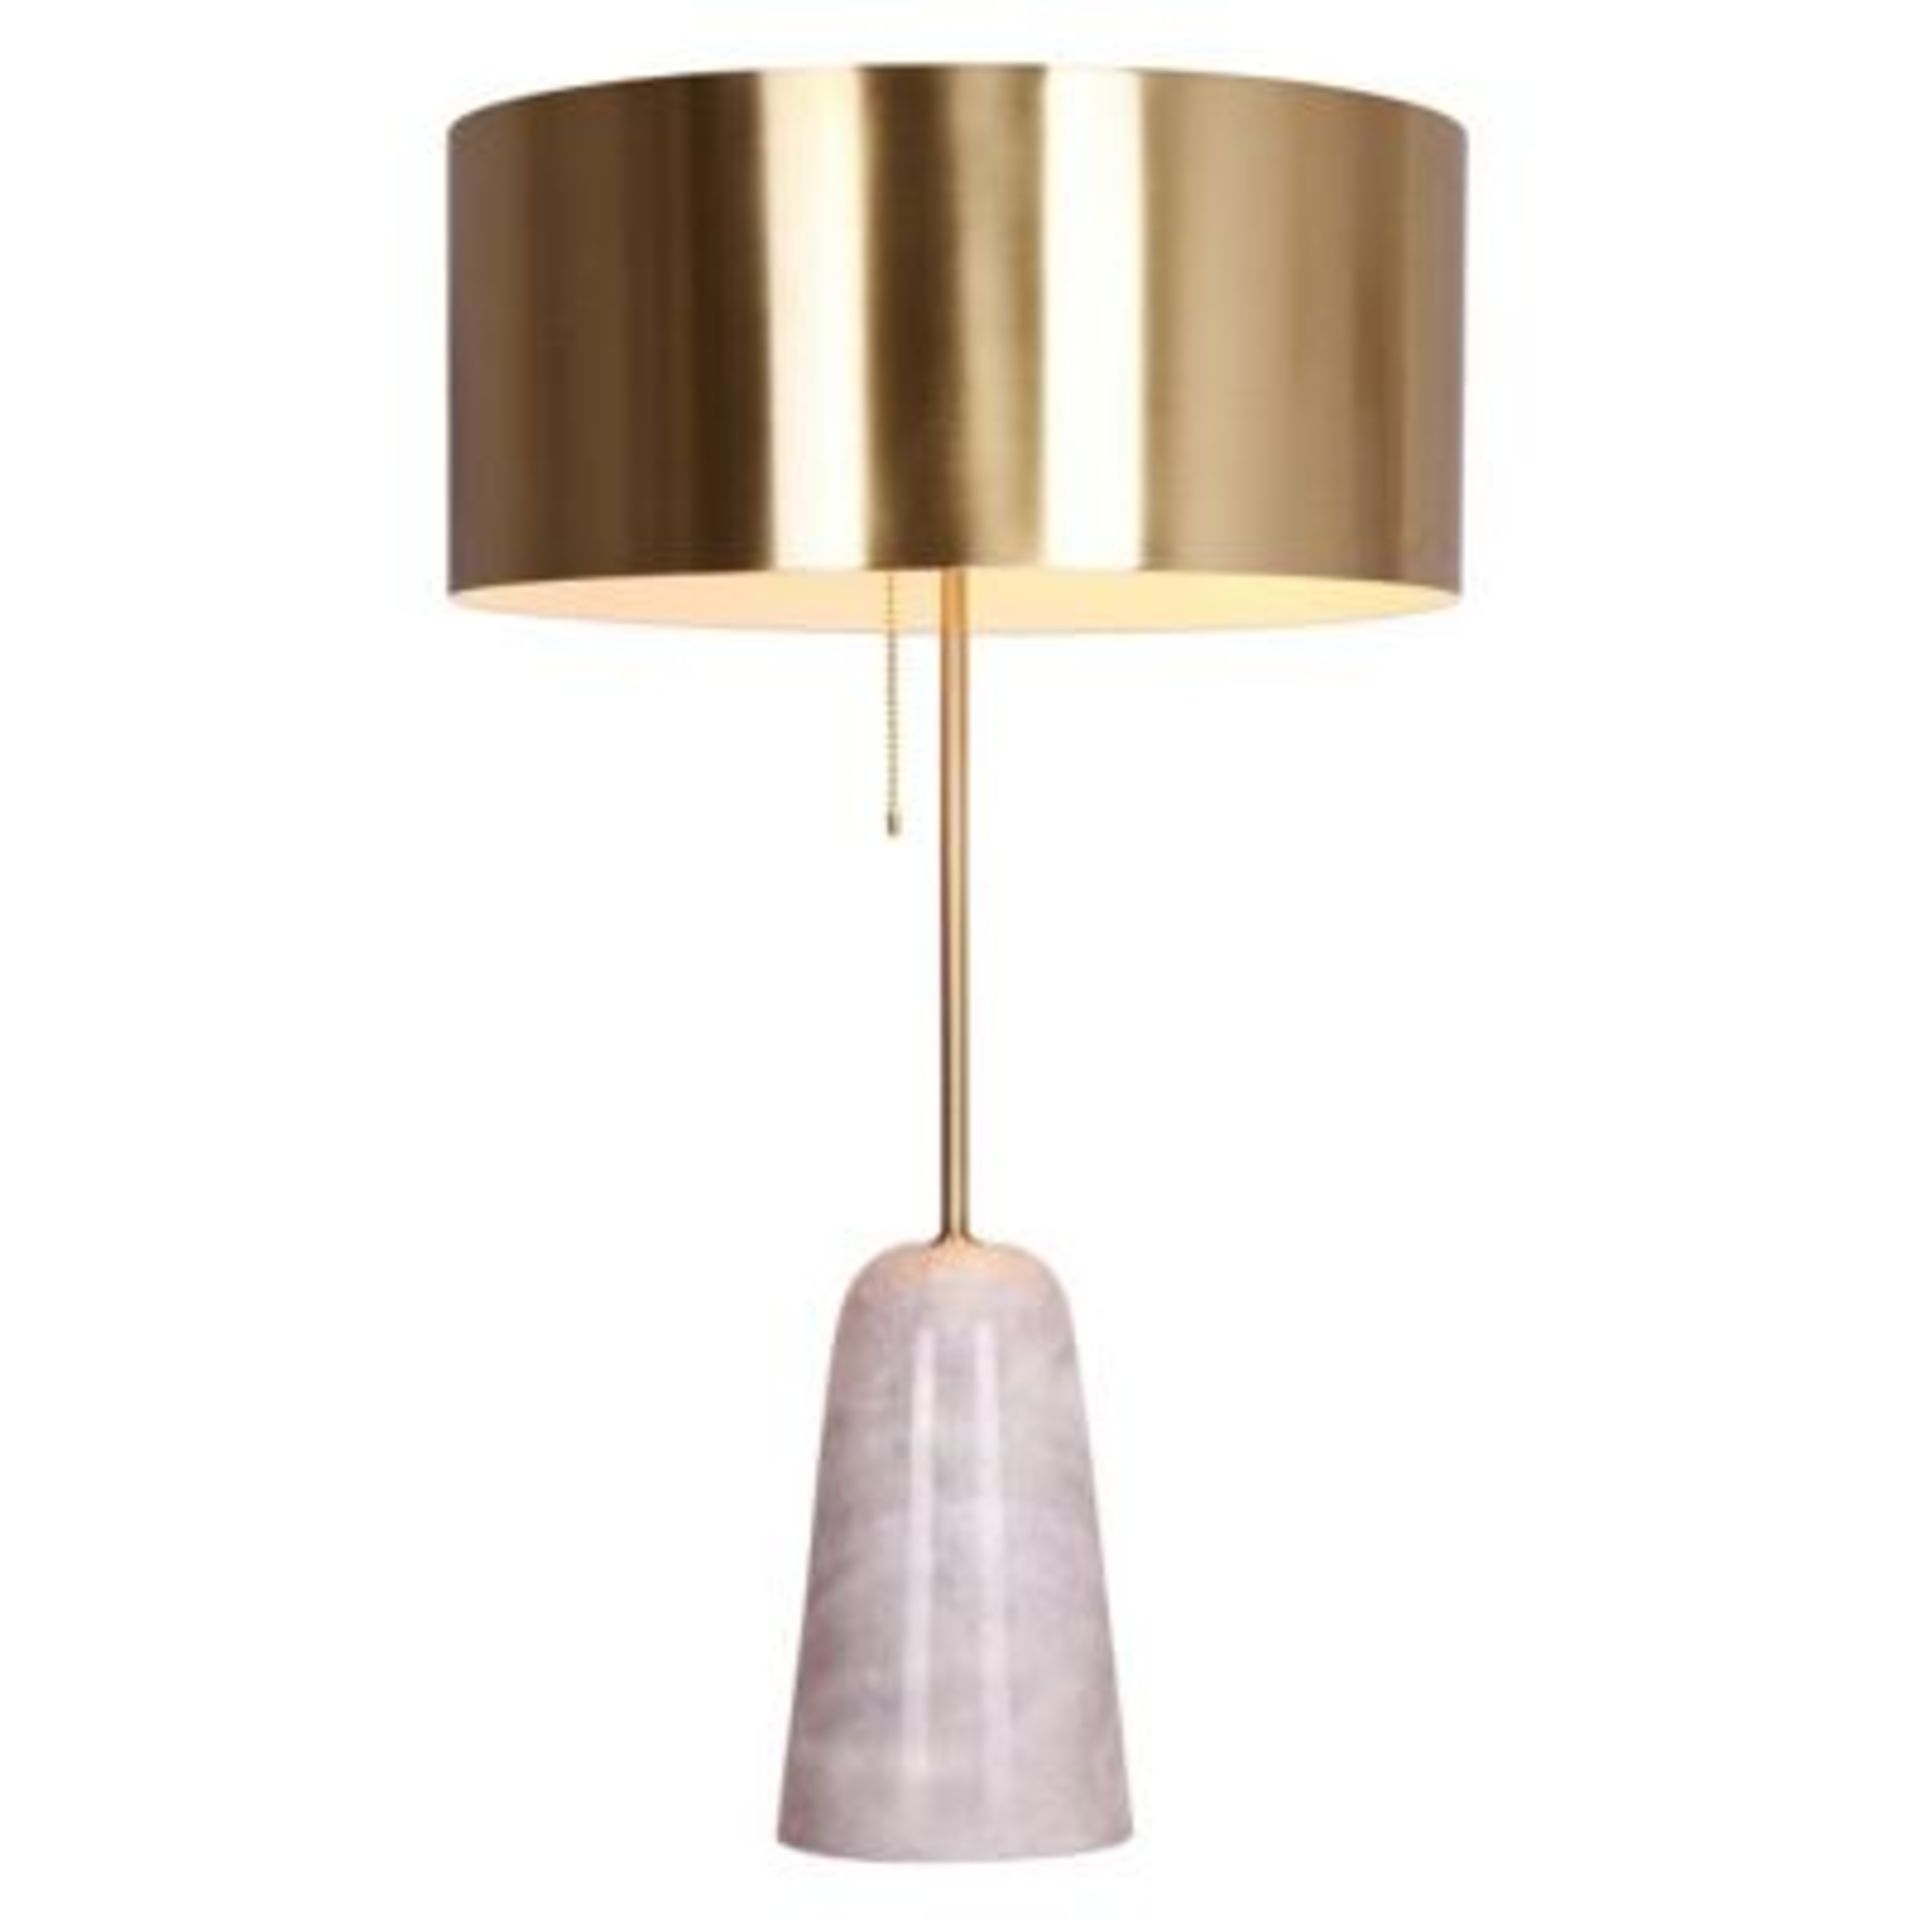 Boxed Jasepr Conran Milo Marble and Gold Shade Designer Table Light RRP £100 (Viewing Is Highly